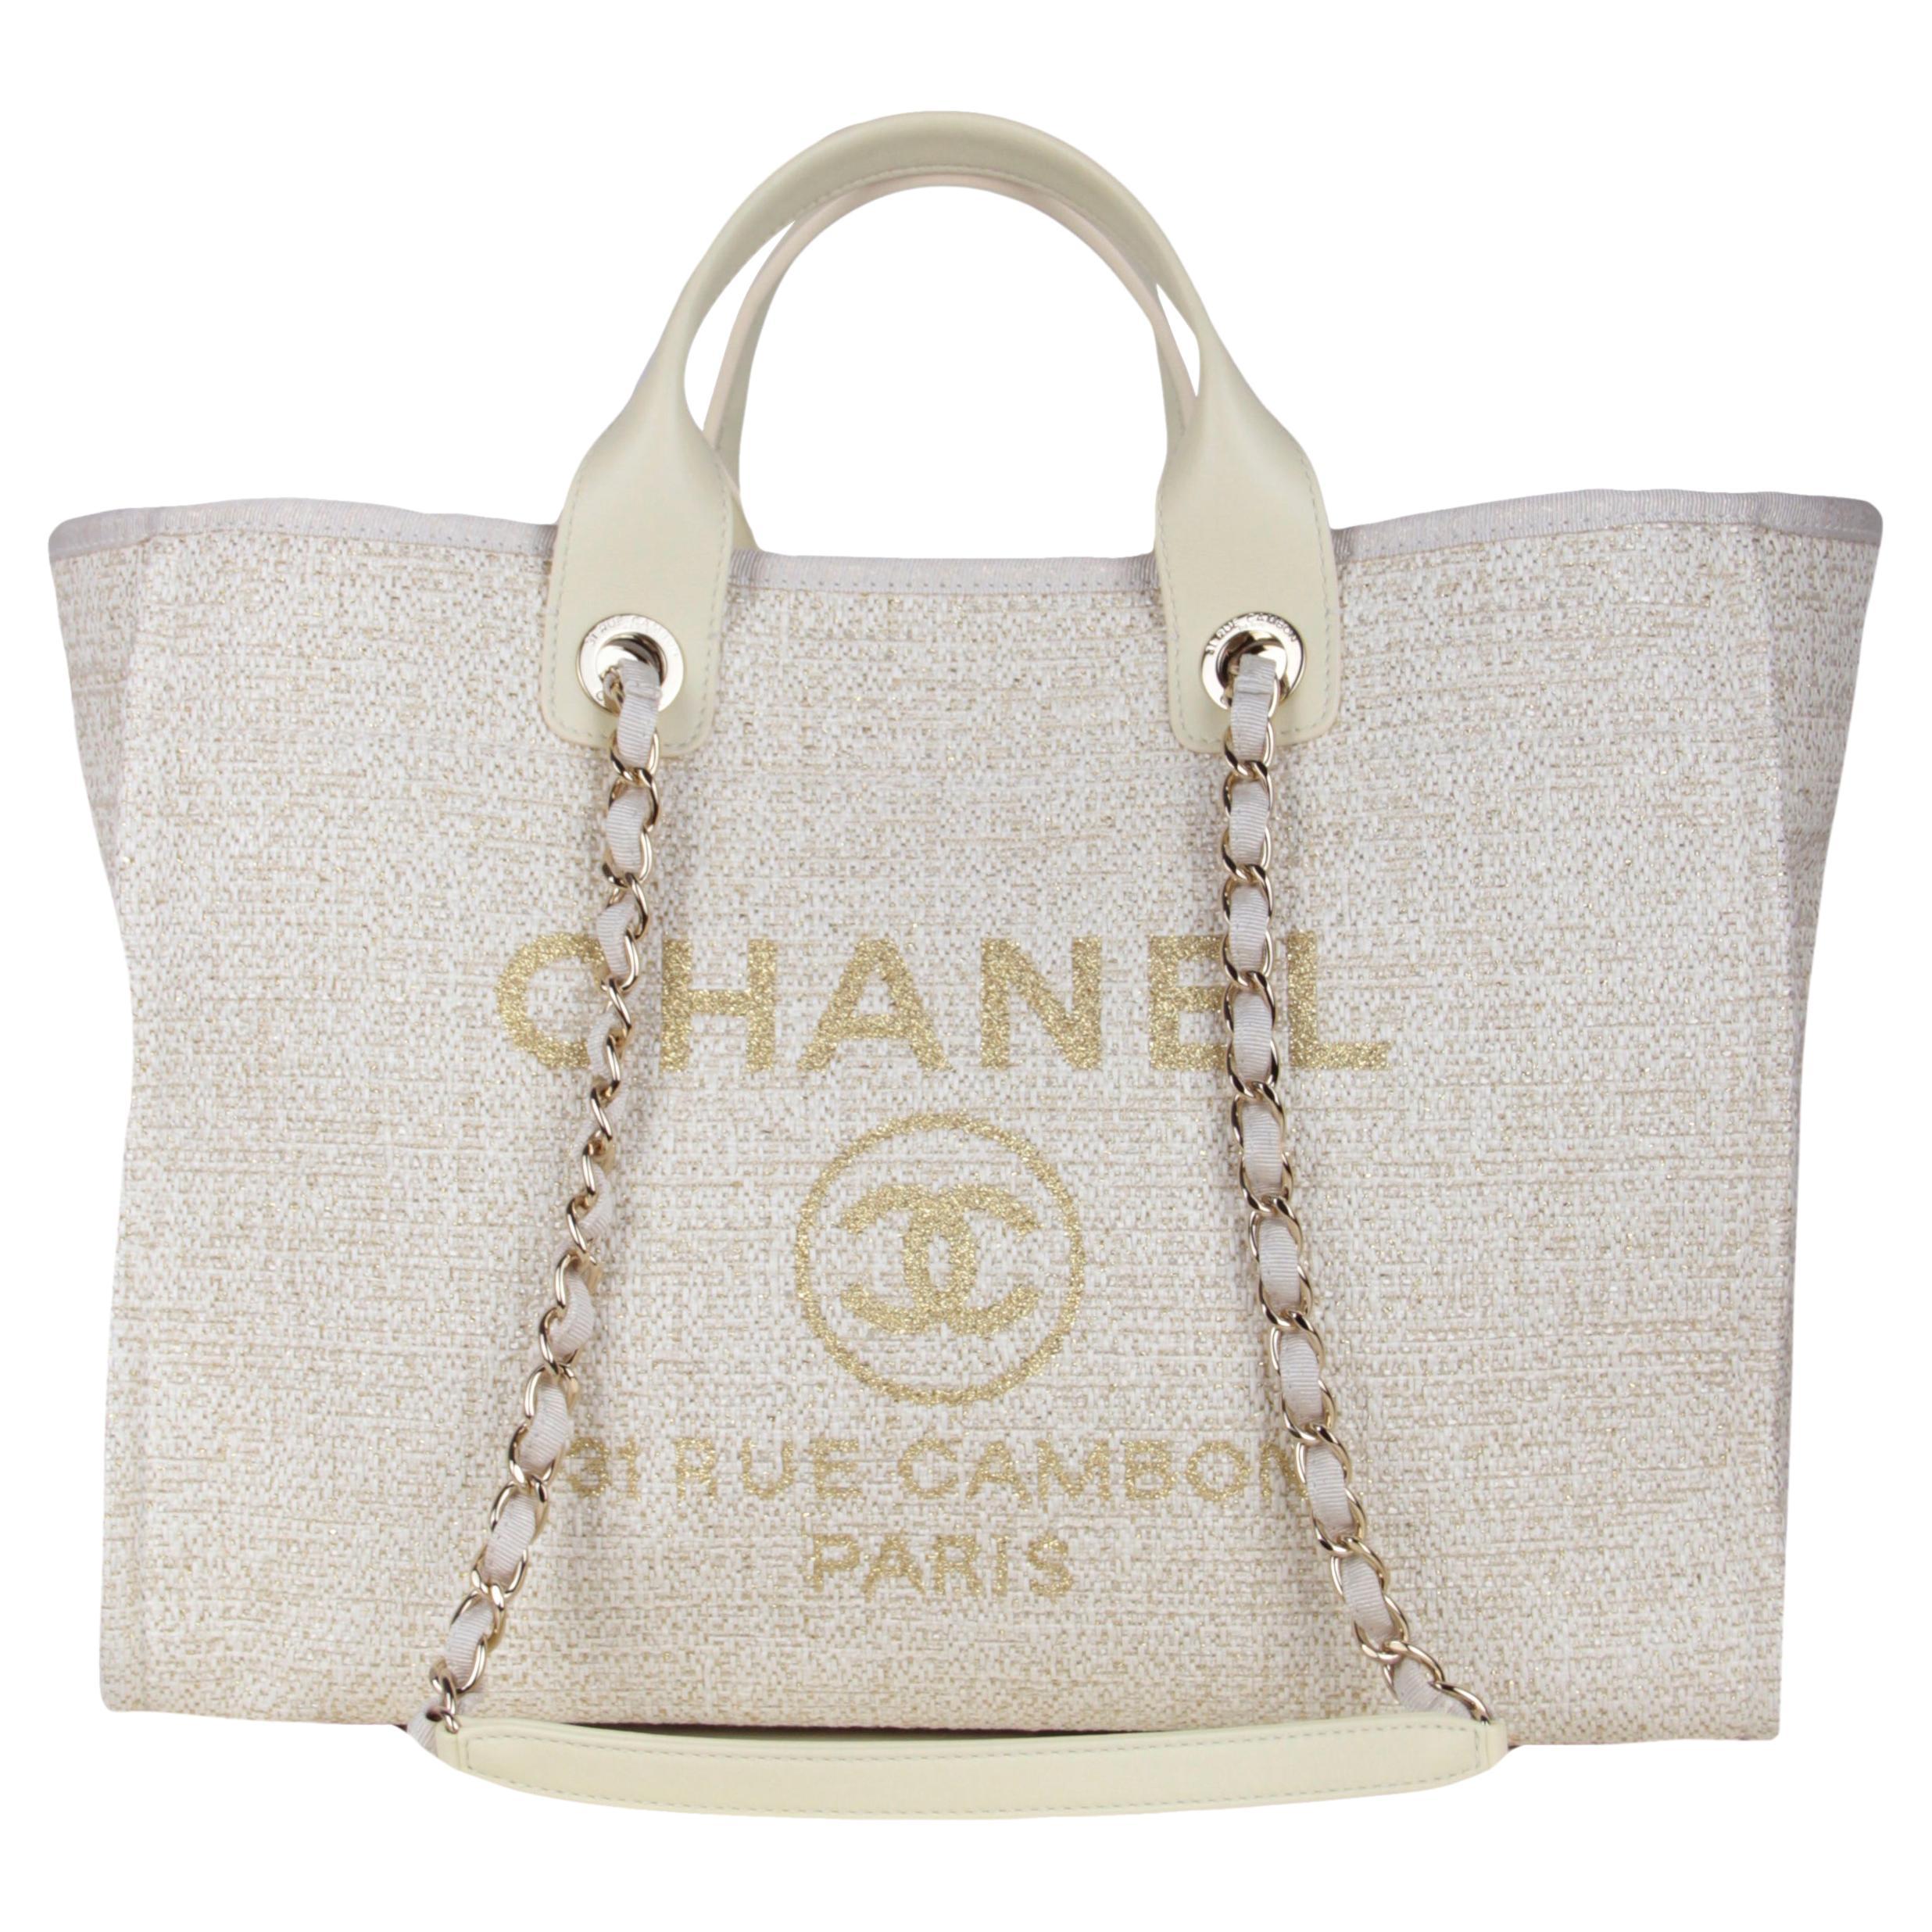 gold chanel tote bag